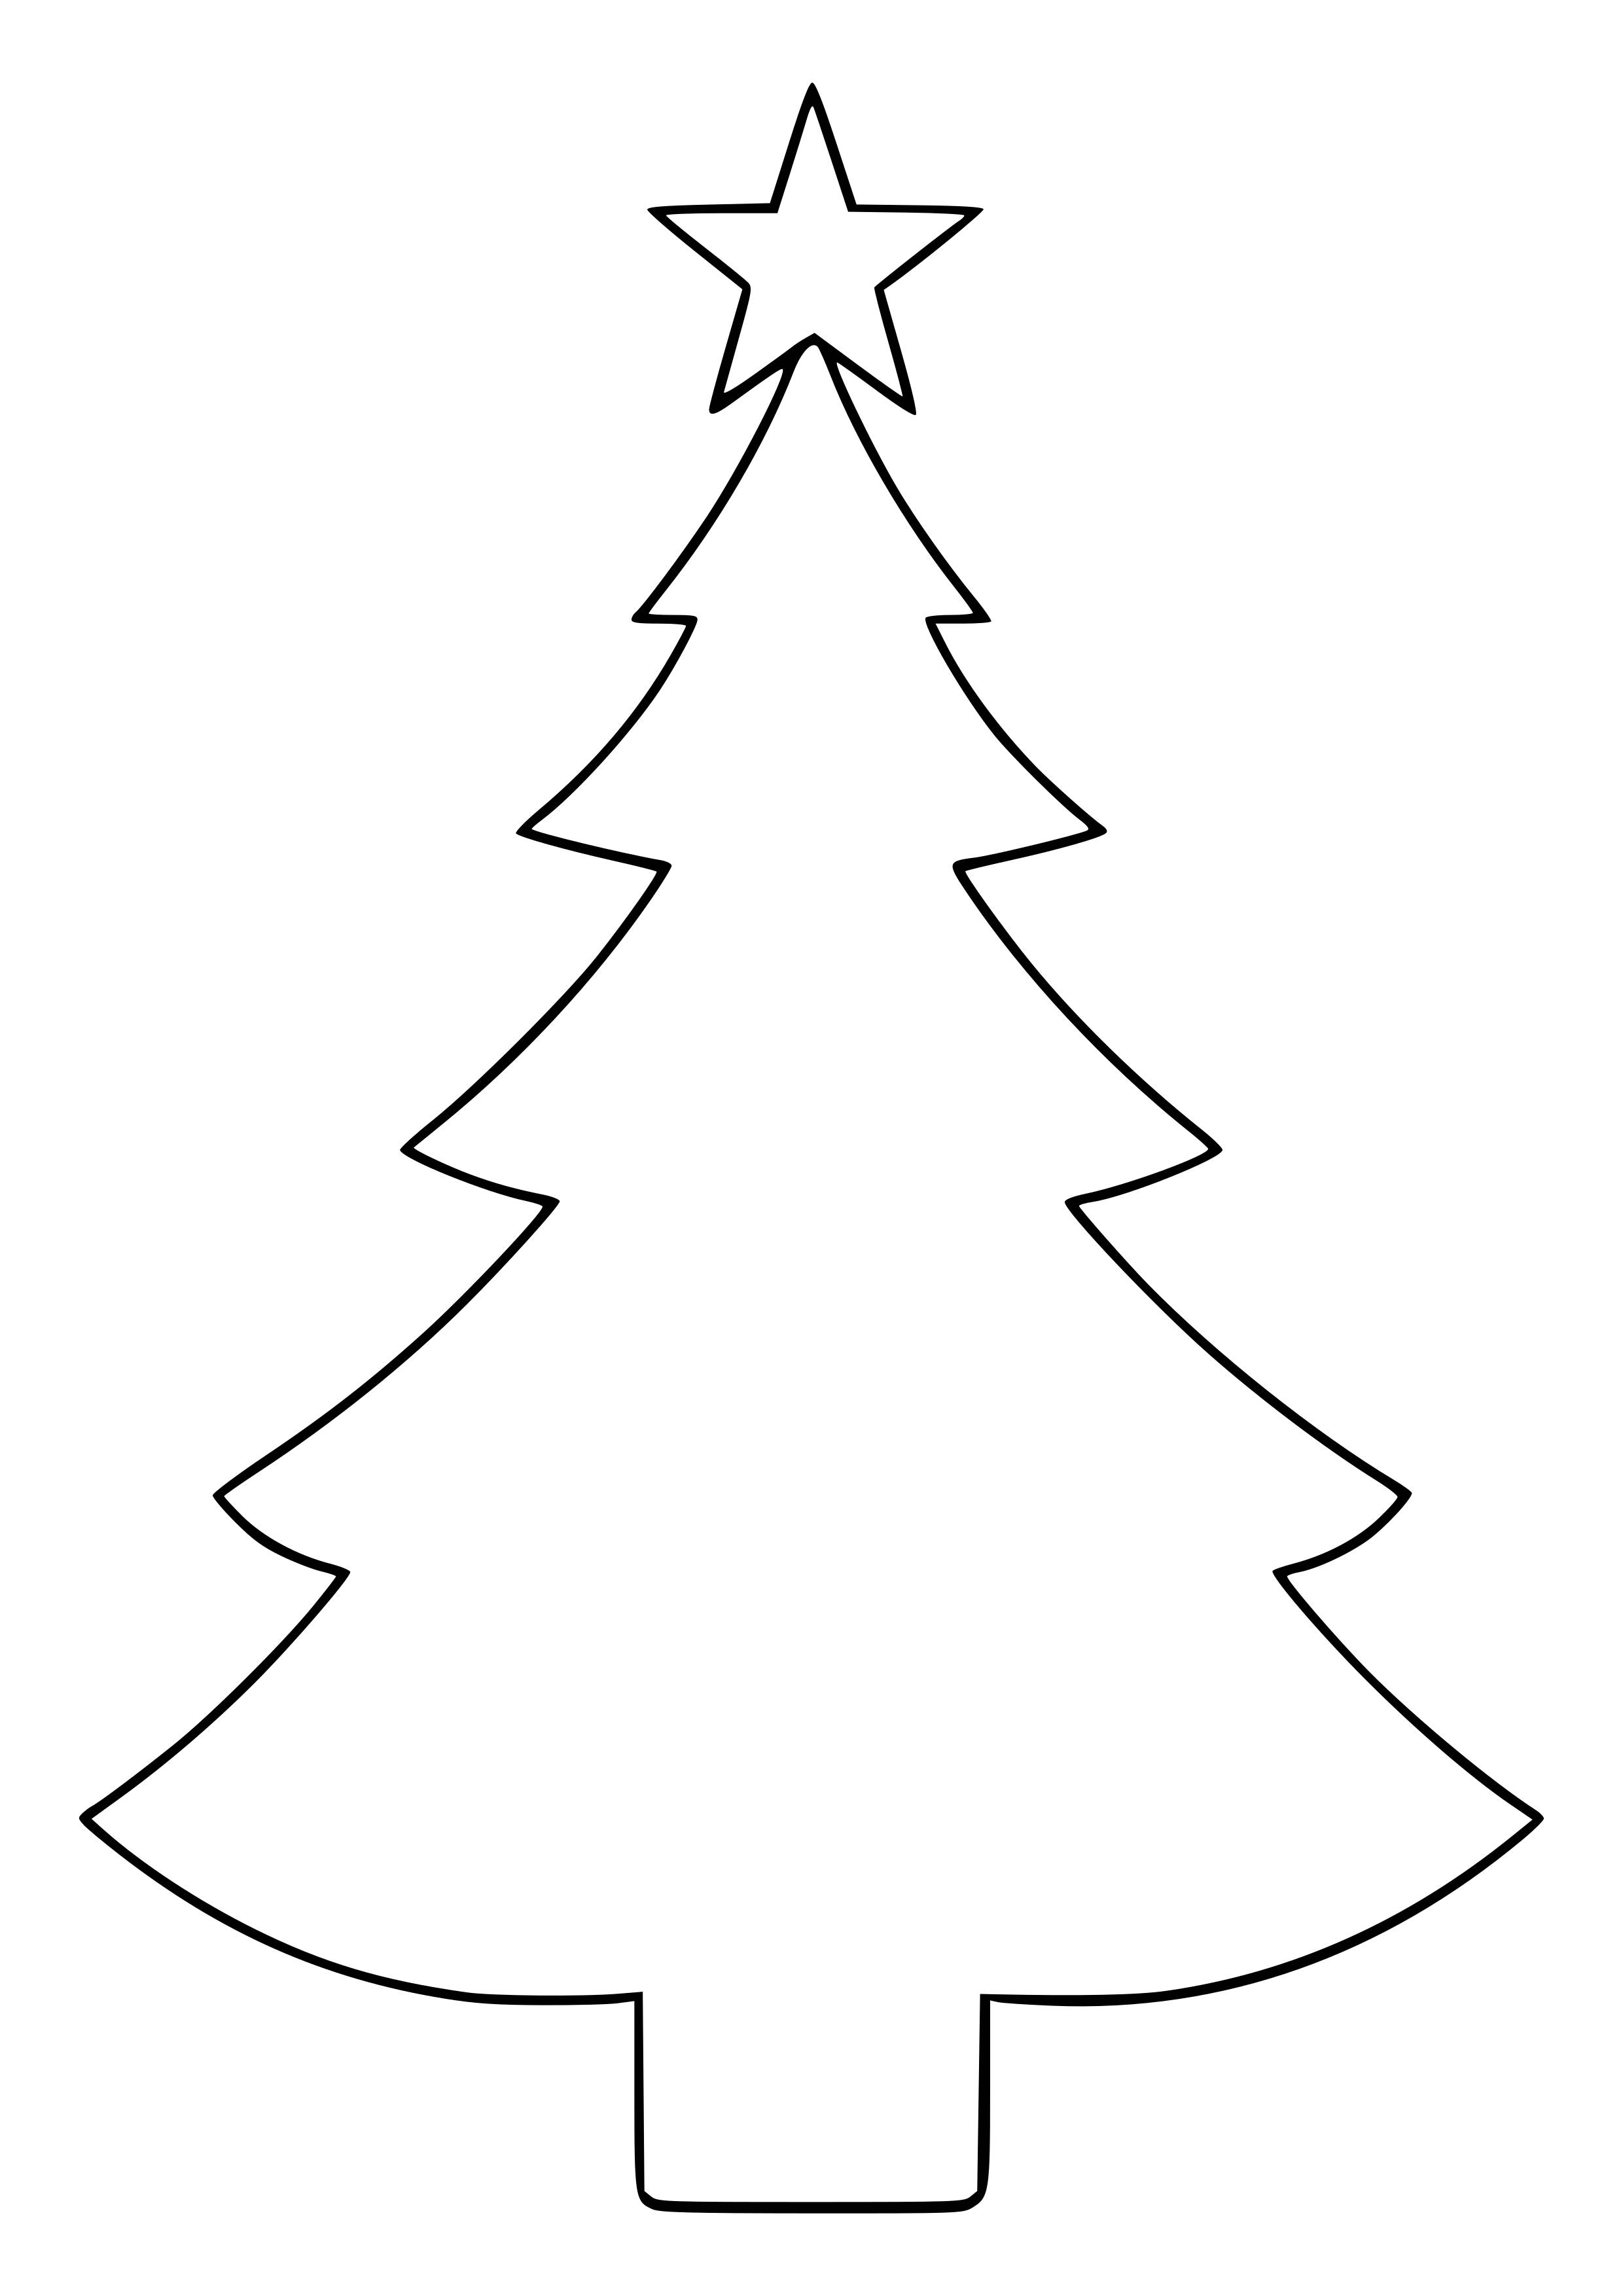 Gorgeous Christmas tree coloring template